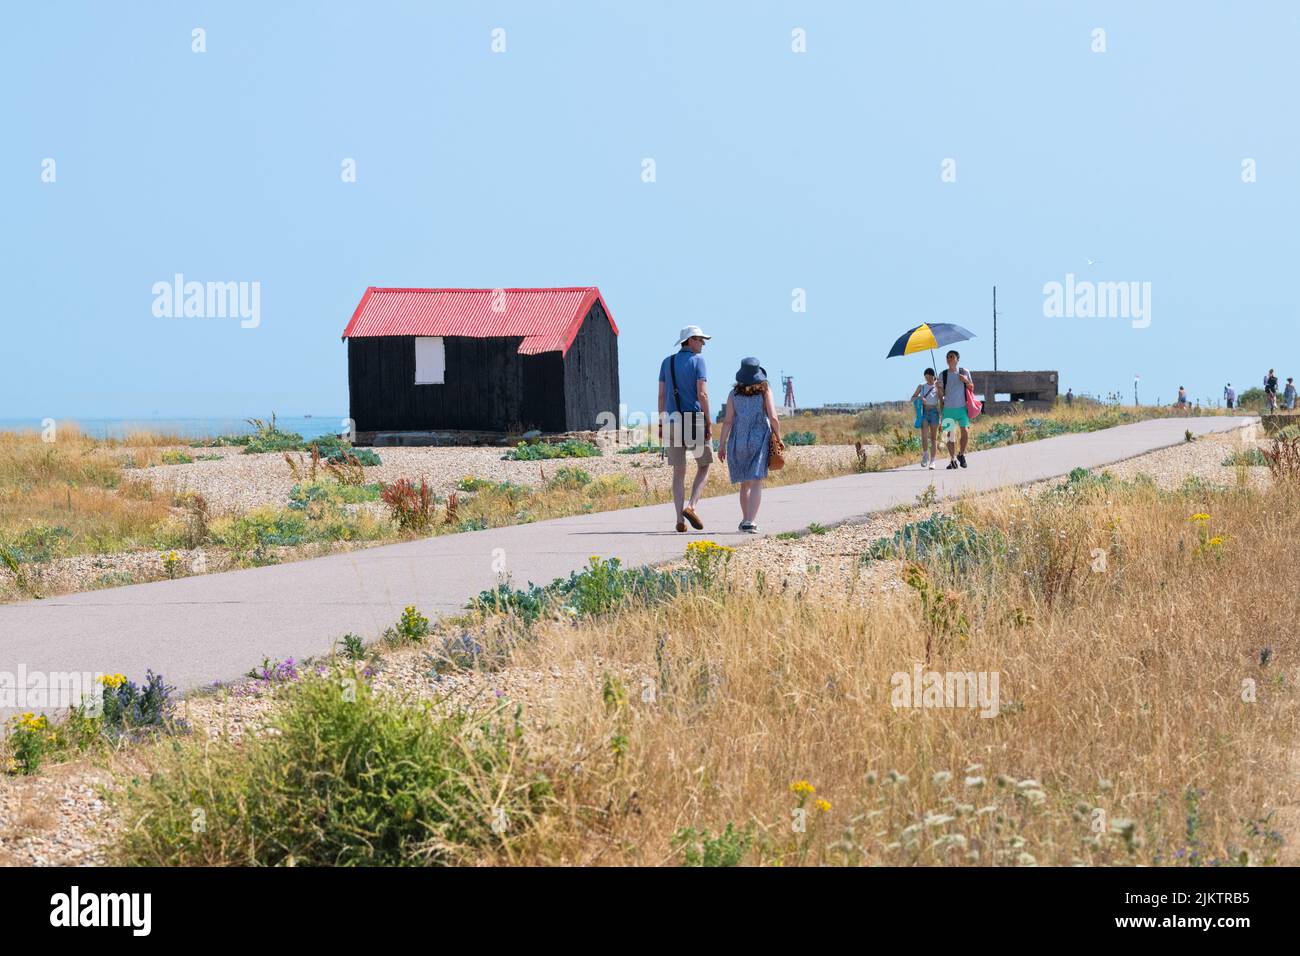 Rye Harbour Nature Reserve - tourists walking past the Red Roofed Hut in summer - Rye, East Sussex, England, UK Stock Photo